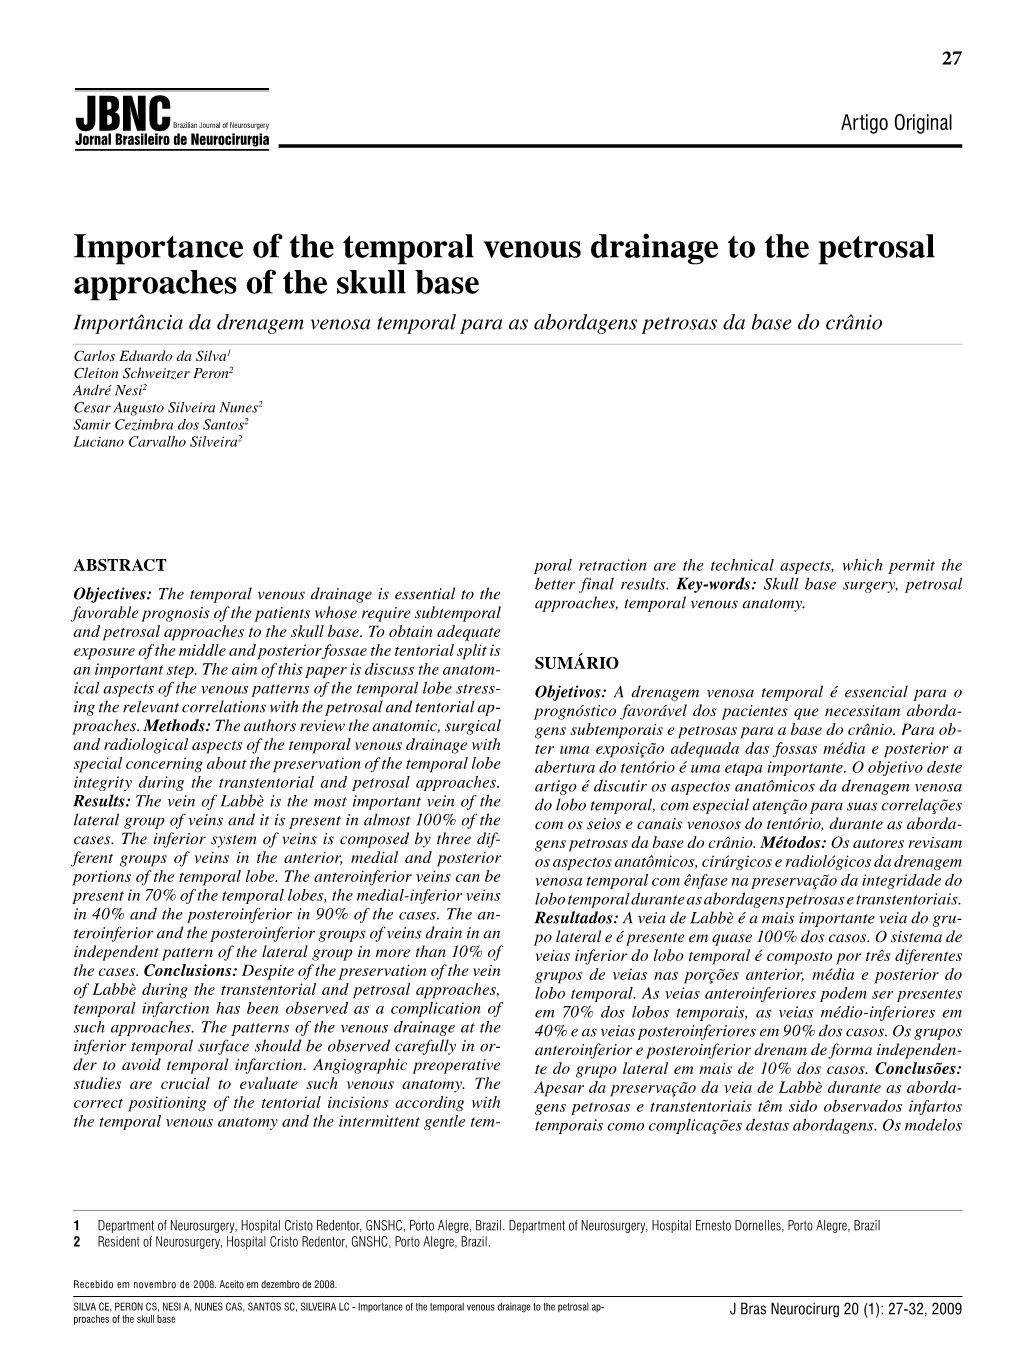 Importance of the Temporal Venous Drainage to the Petrosal